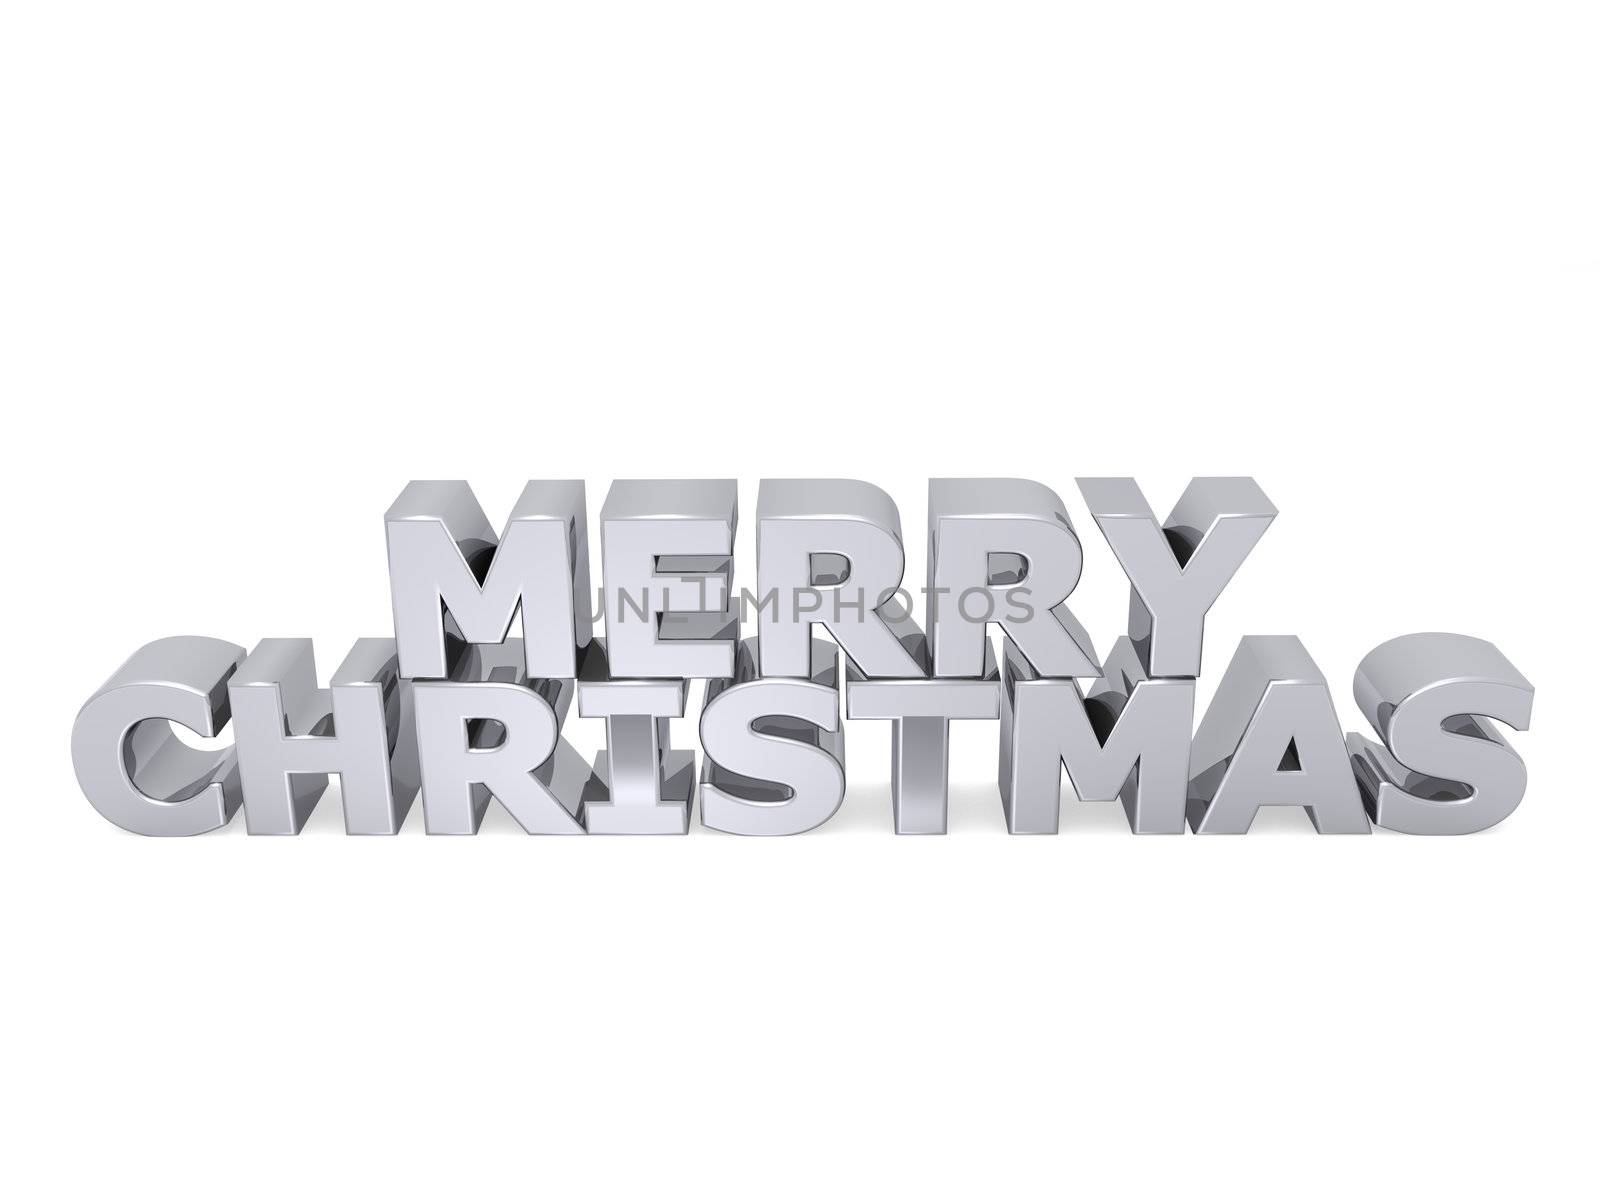 merry christmas word with metal letters